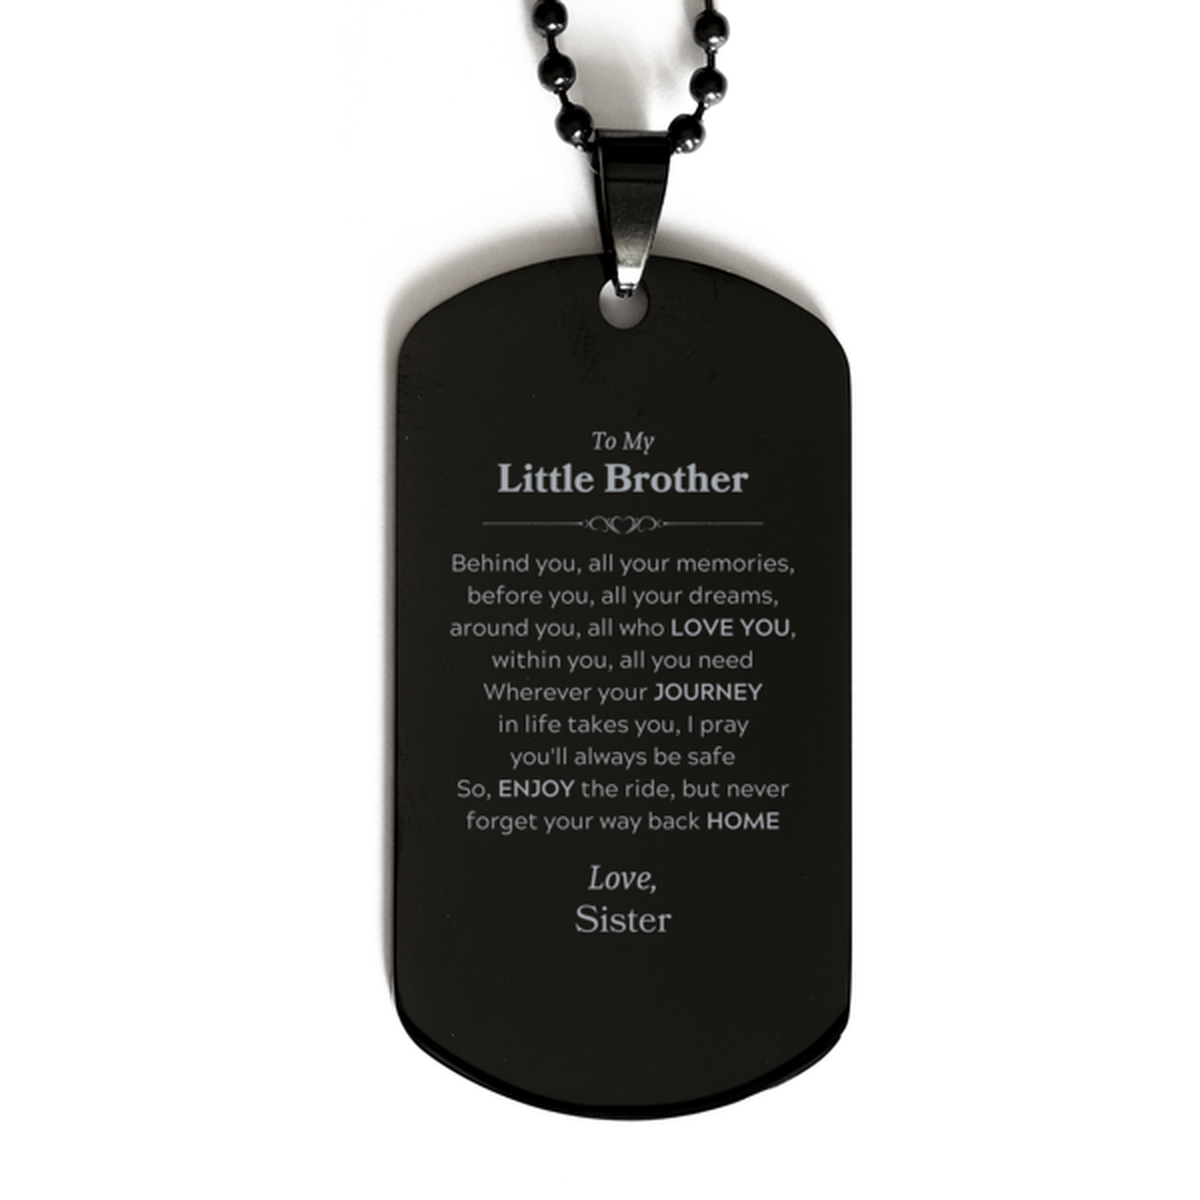 To My Little Brother Graduation Gifts from Sister, Little Brother Black Dog Tag Christmas Birthday Gifts for Little Brother Behind you, all your memories, before you, all your dreams. Love, Sister